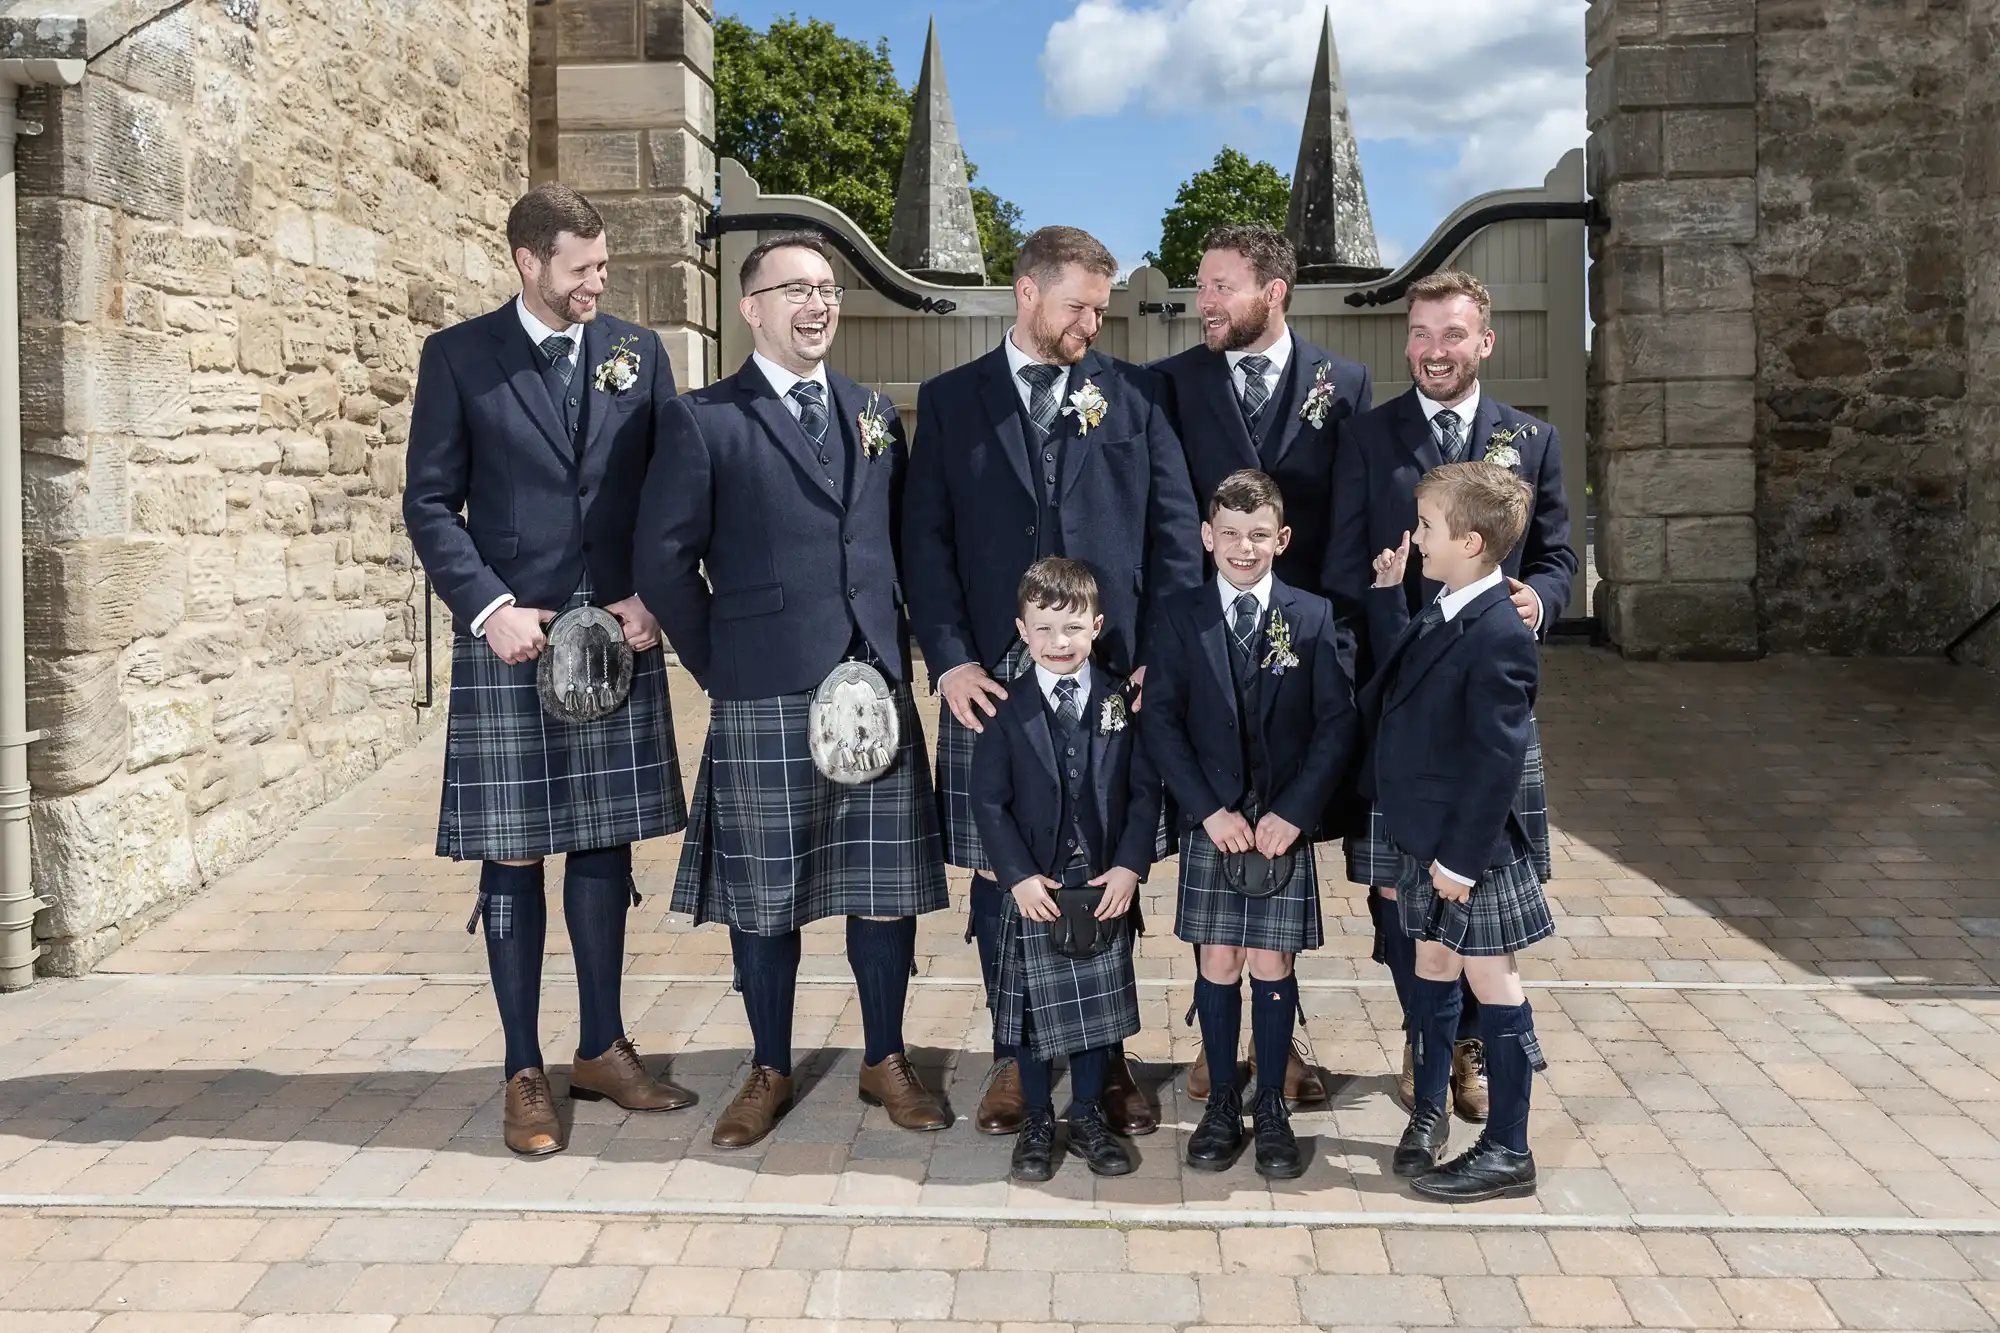 Five men and three boys in formal Scottish attire, including kilts and sporran, posing happily outside a stone building.